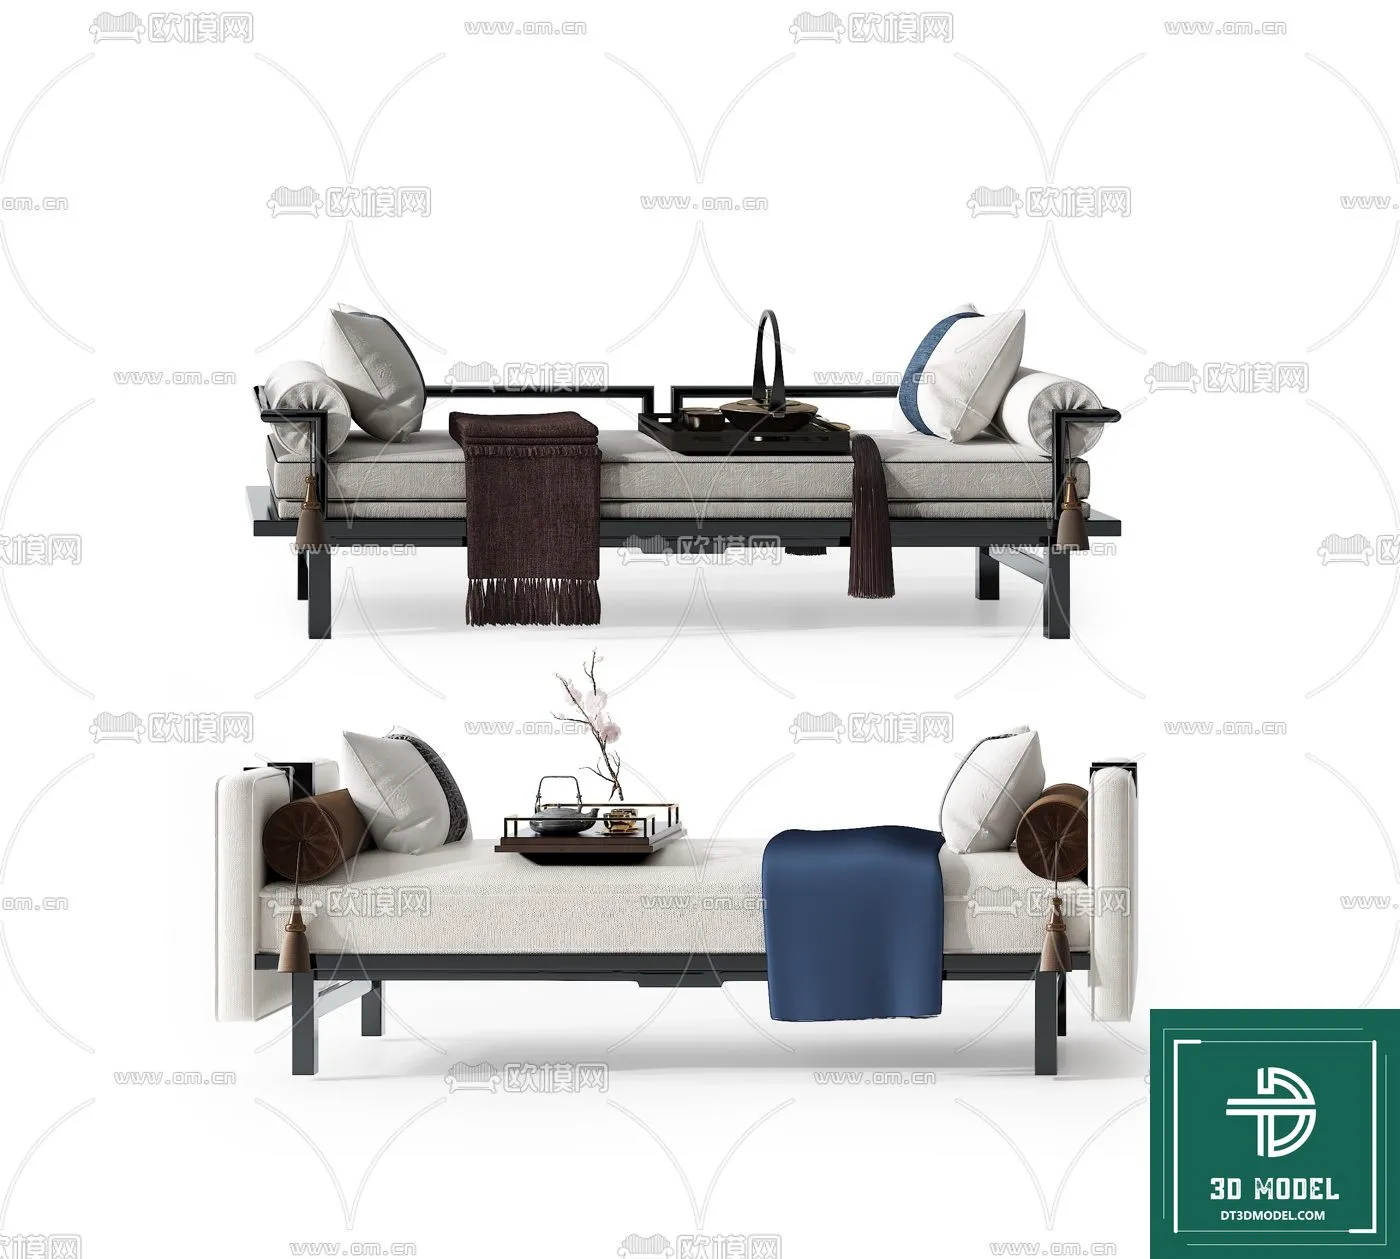 INDOCHINE STYLE – 3D MODELS – 160